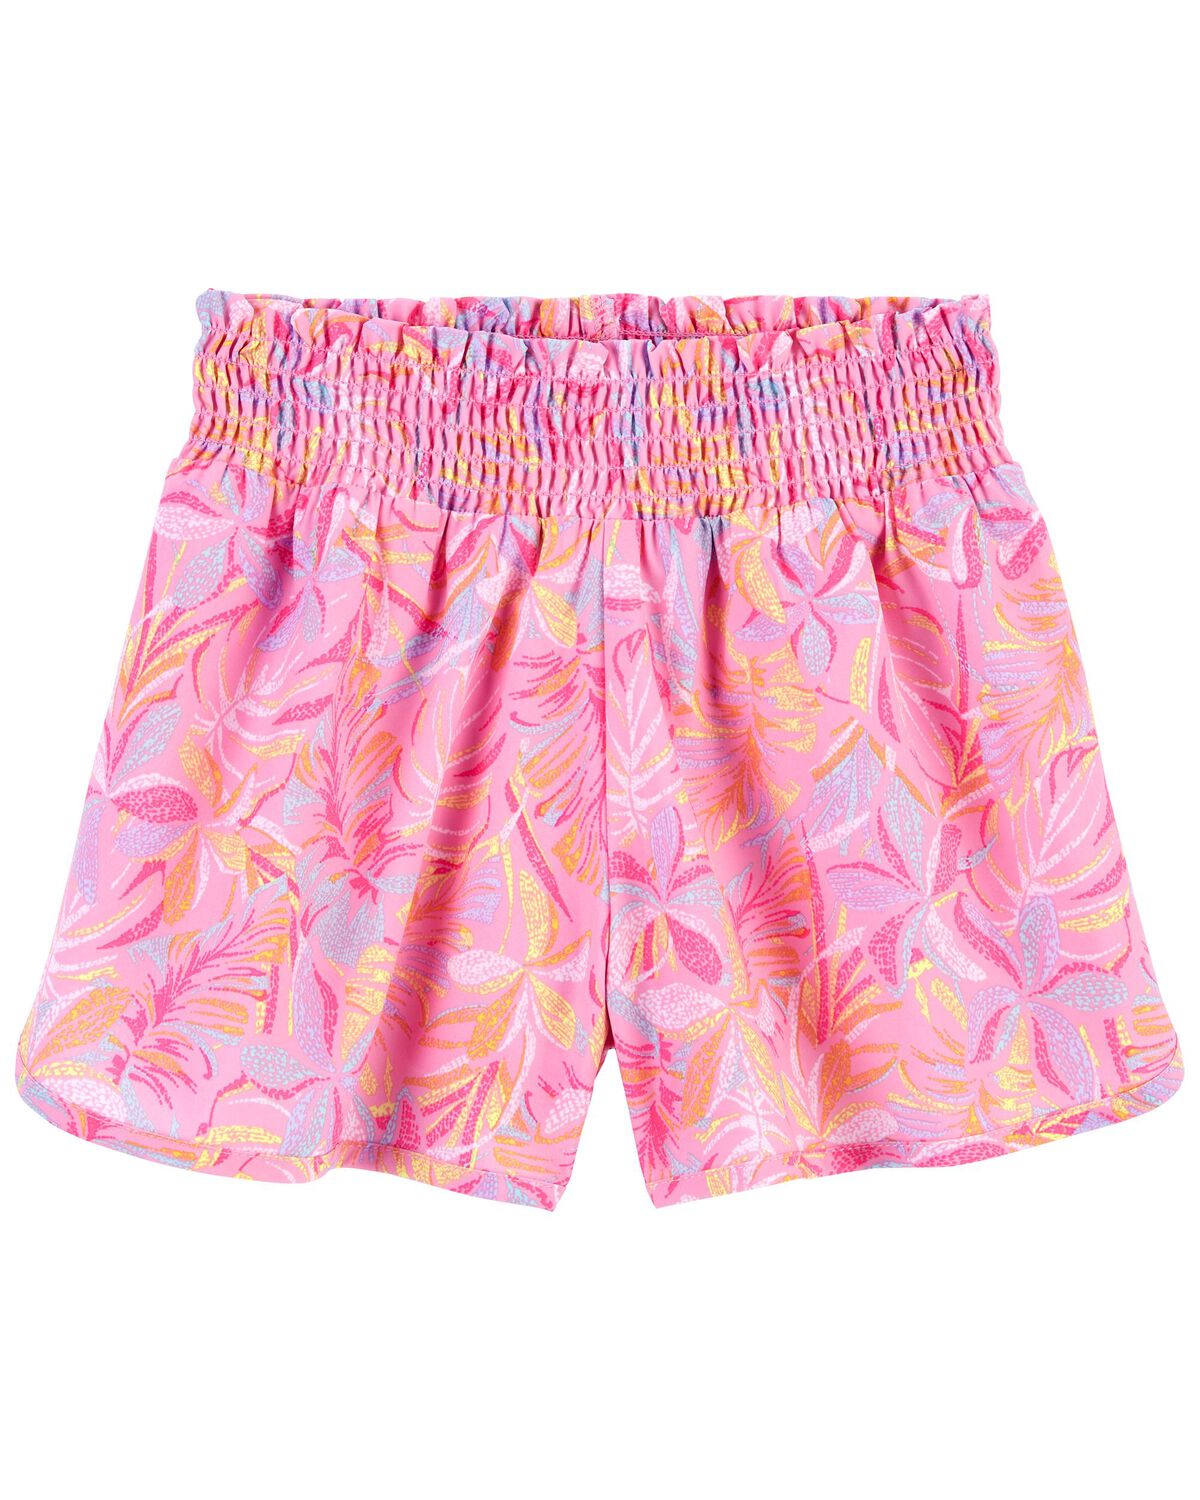 Kid Smocked Shorts in Moisture Wicking Active Fabric